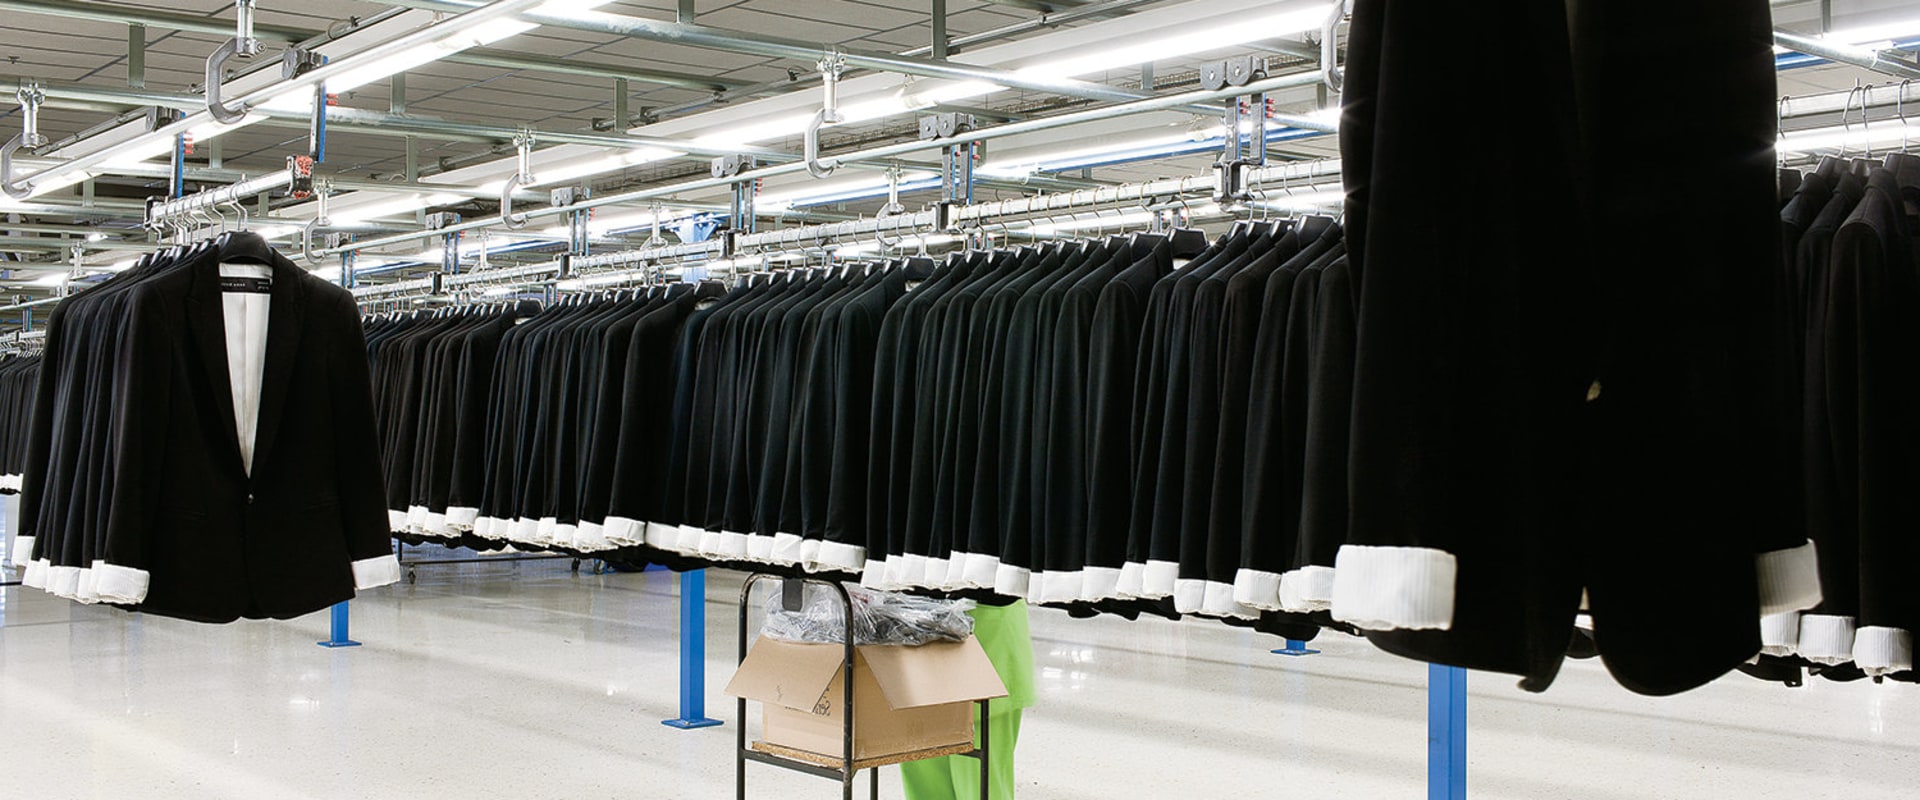 Who is the largest clothing company in the world?